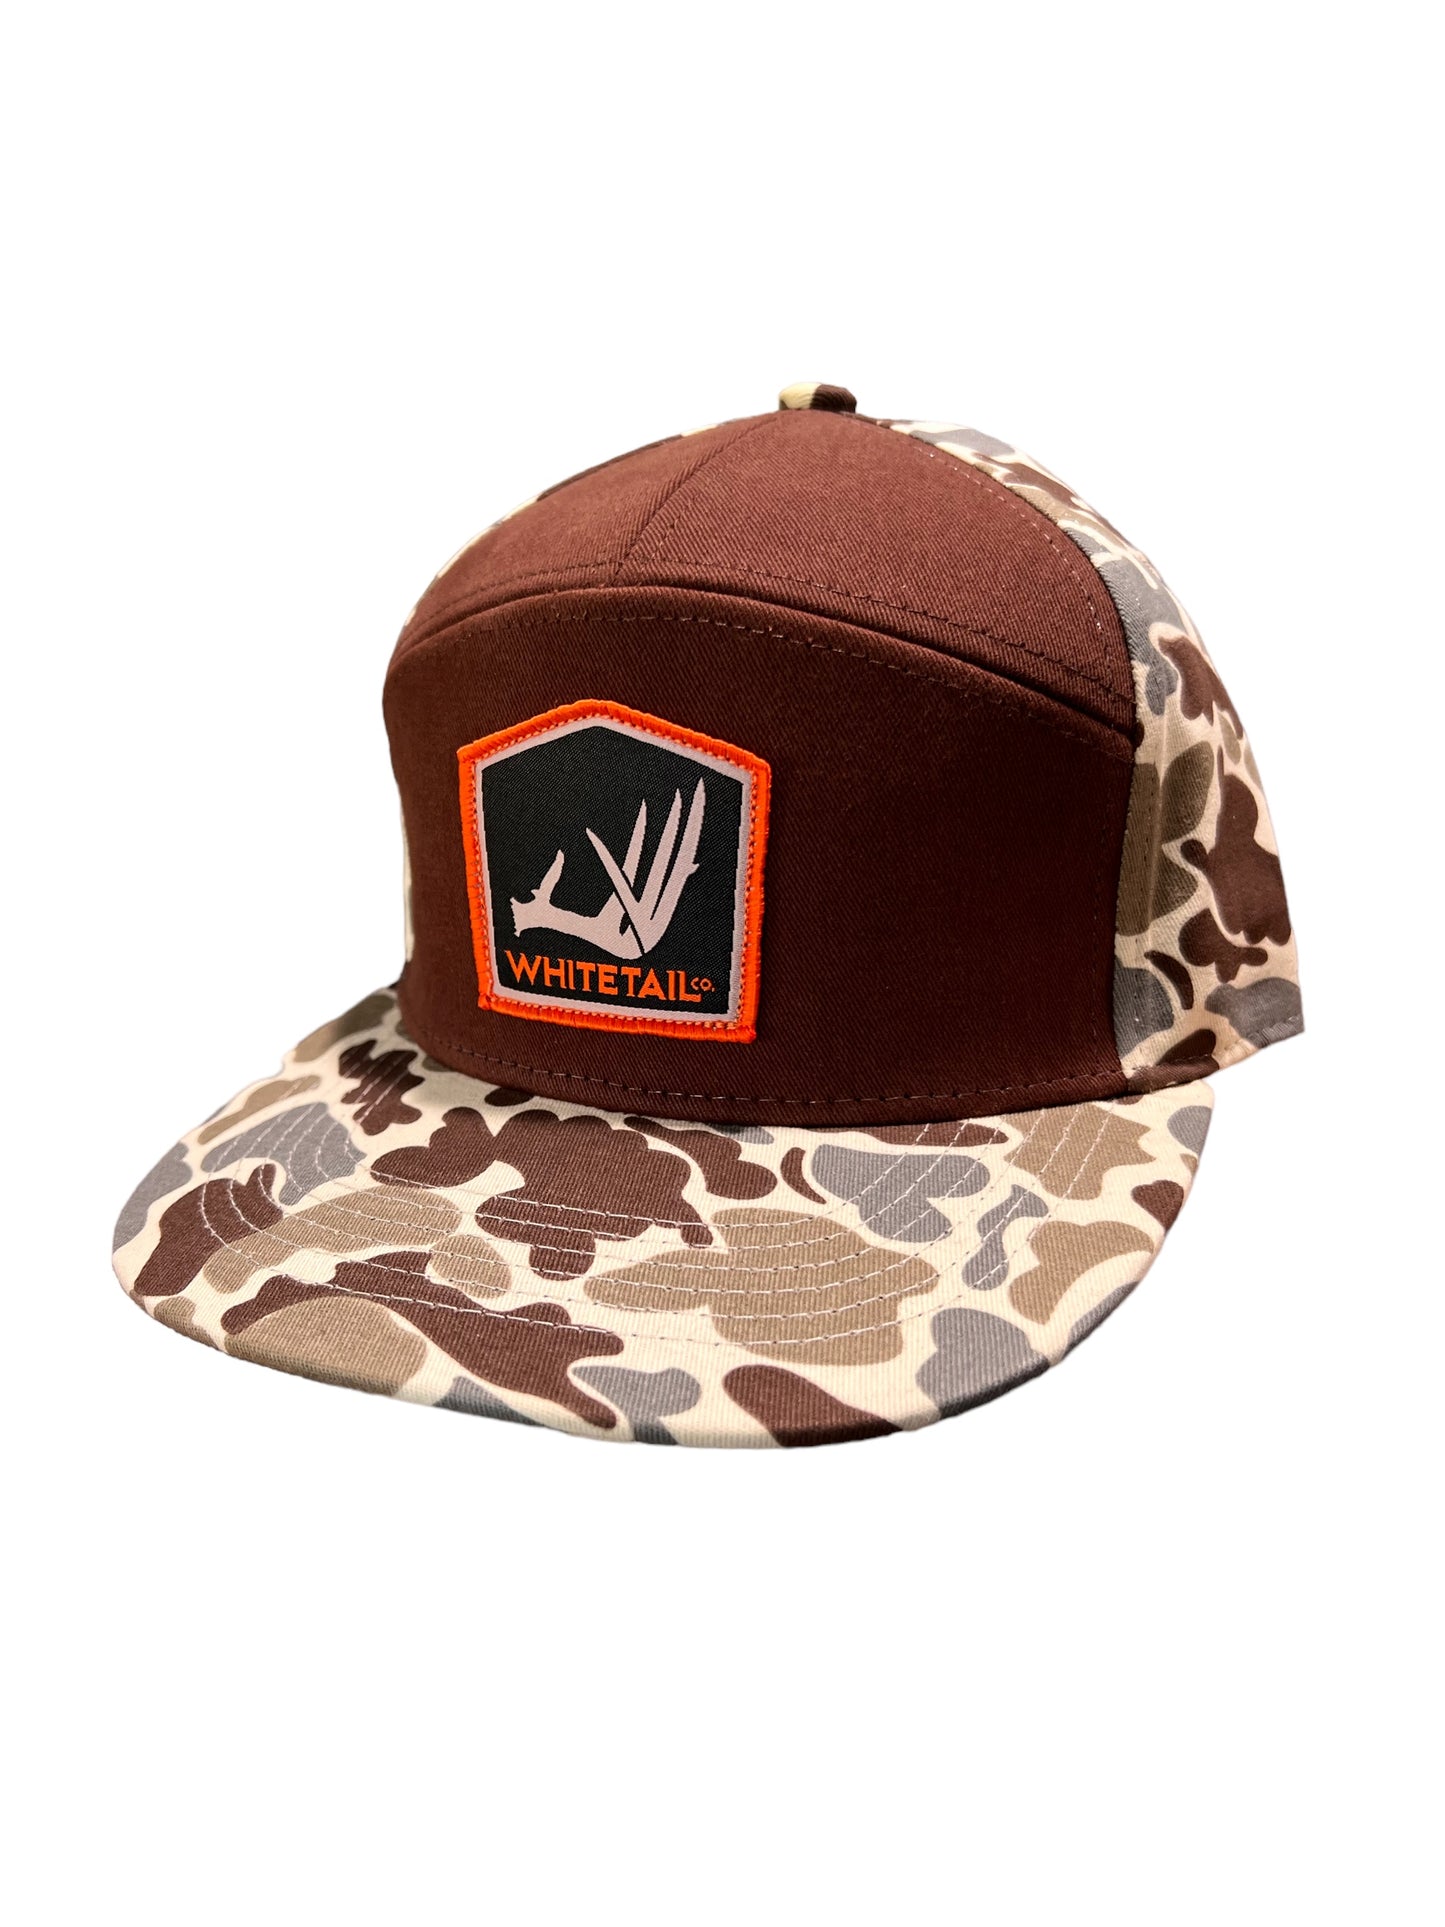 Whitetail Co. Old School 7 Panel Shed